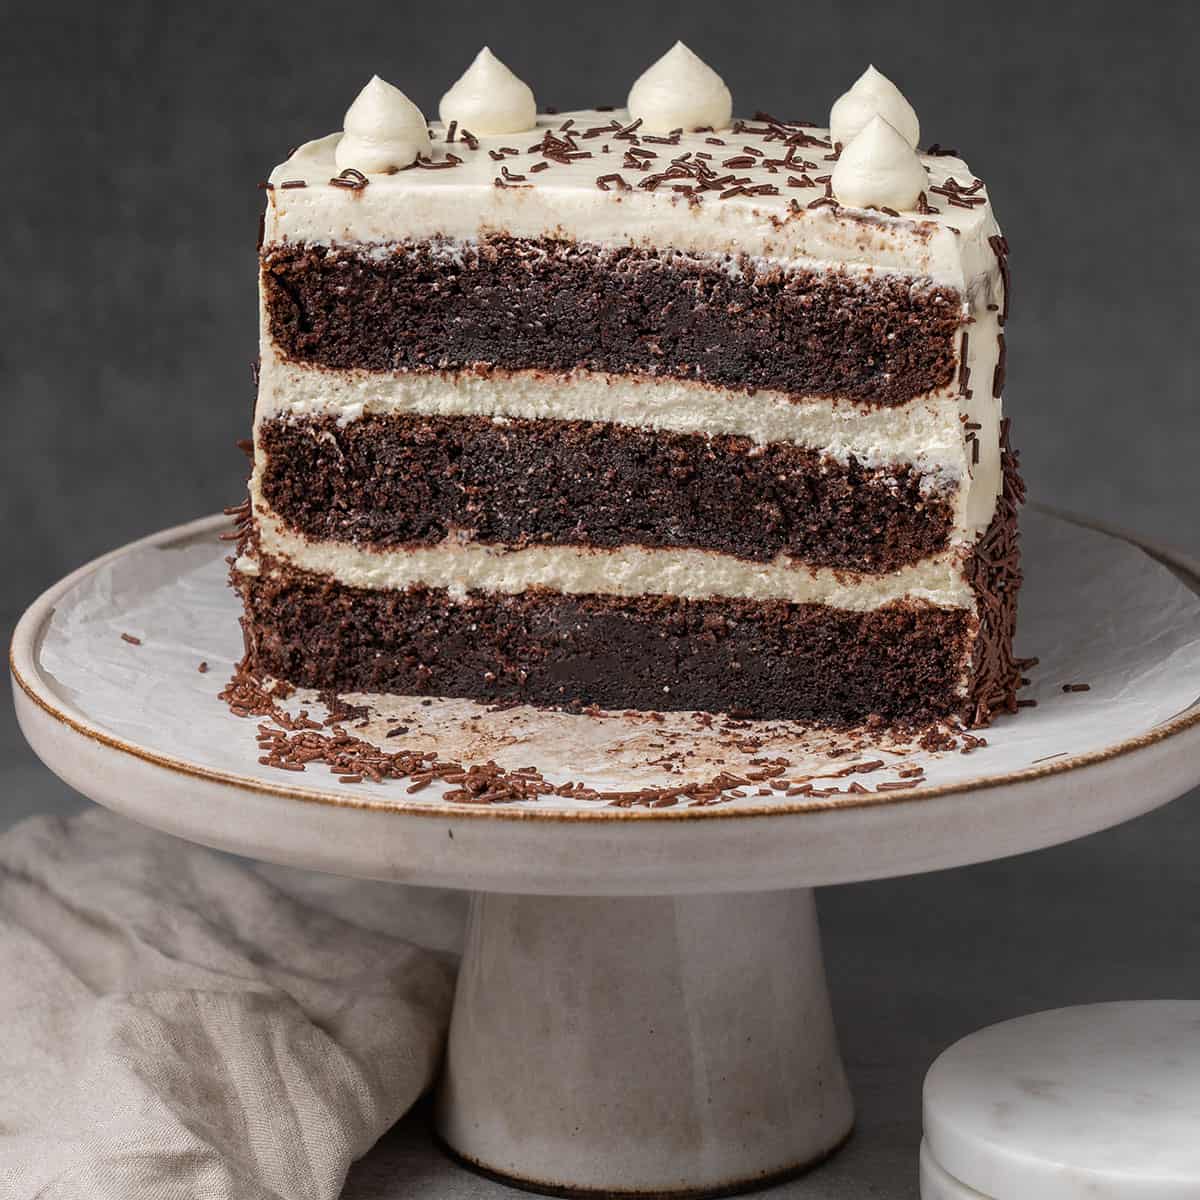 A half Chocolate cake with cream cheese frosting on a cake stand.